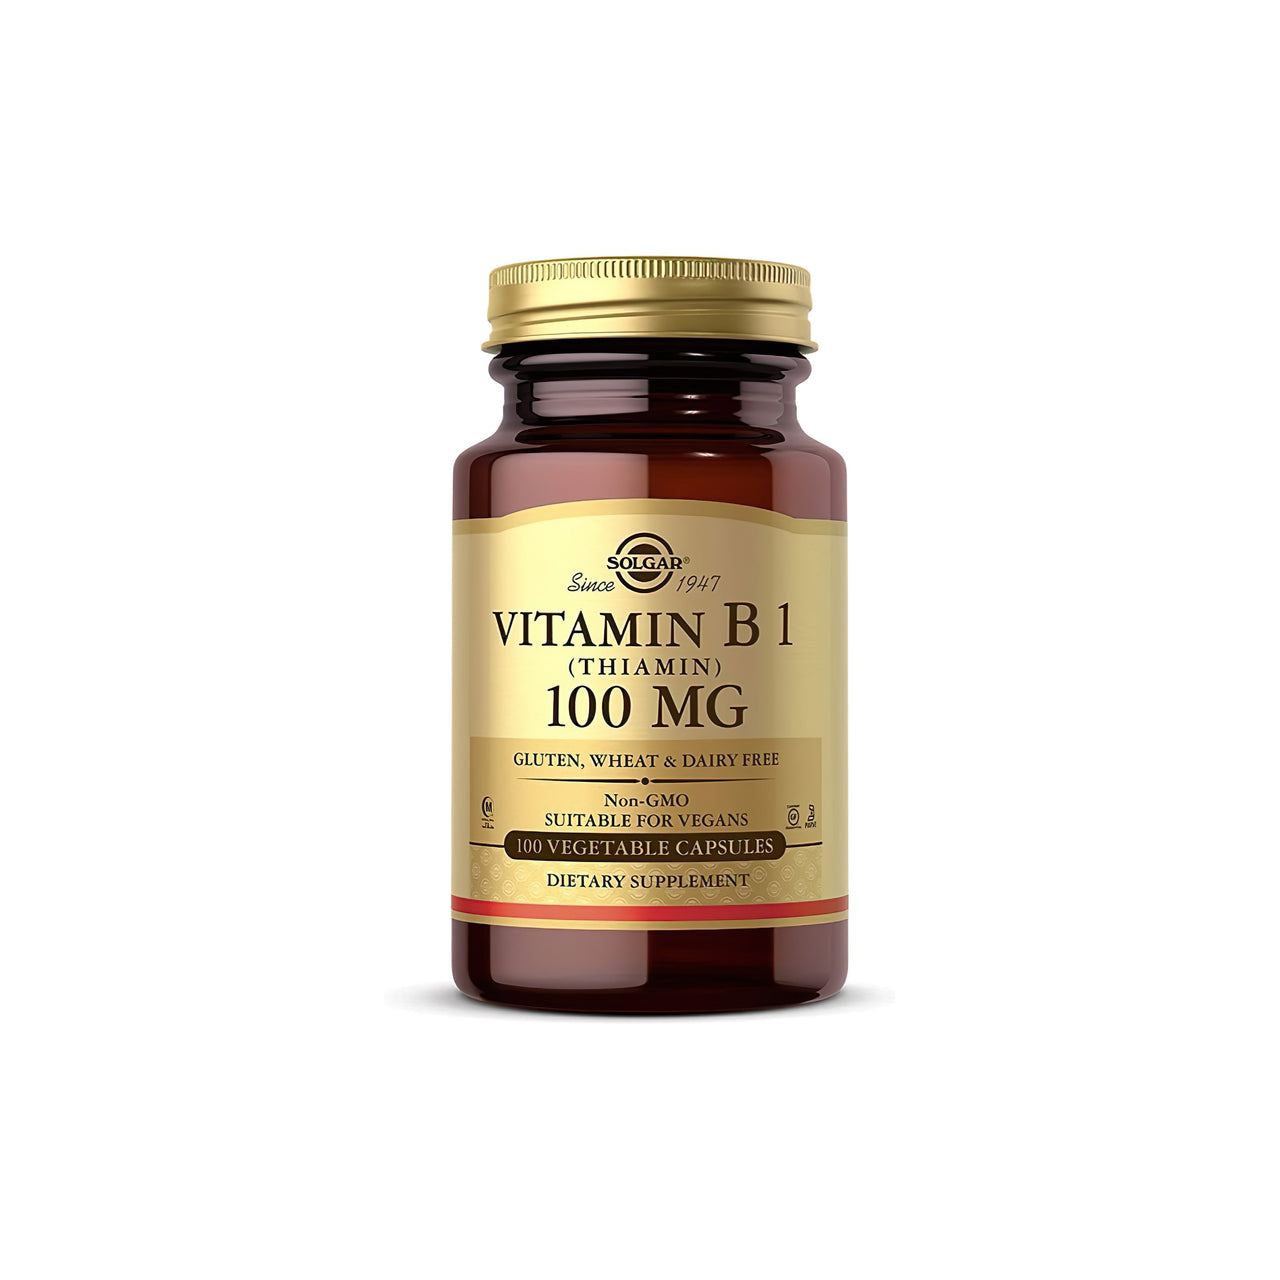 Thiamin (Vitamin B1) 100mg capsules essential for optimal mental and physical health.